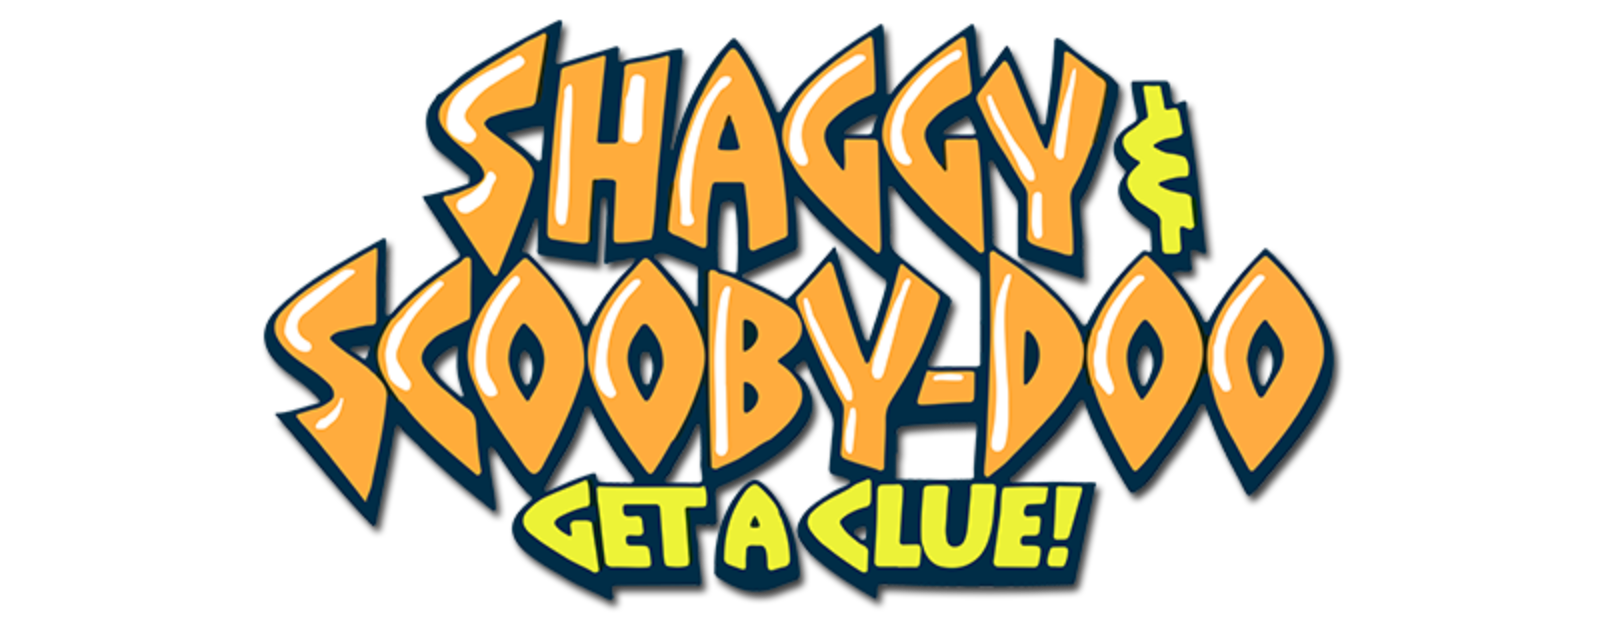 Shaggy Scooby Doo Get a Clue Complete 